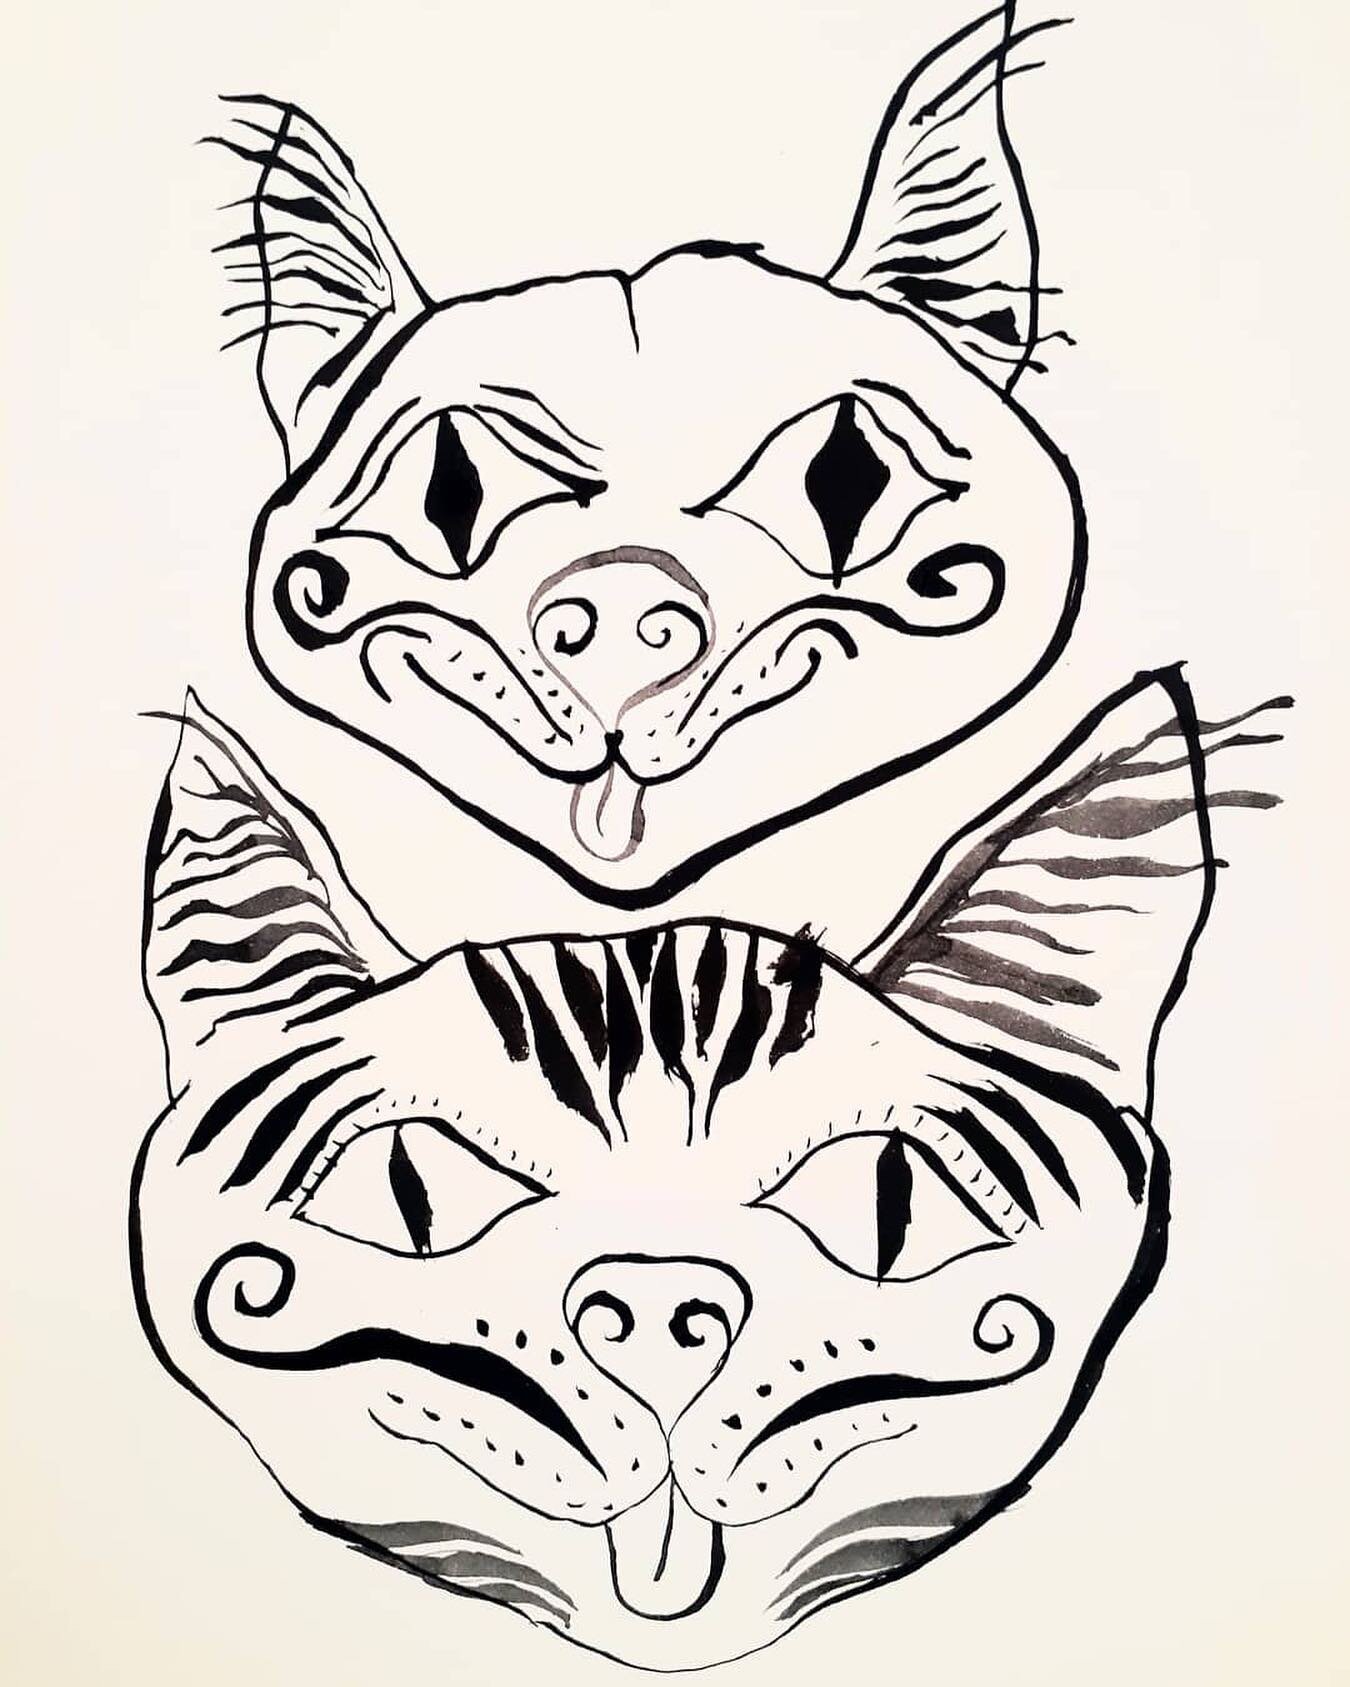 My friend, artist Mike Par&eacute;&rsquo;s drawing. I am super bored with the homogeneous style of pet art and design that is prevalent especially in my field of training. Styles are infinite! Mike also drew the Nosework Cats logo which is our profil